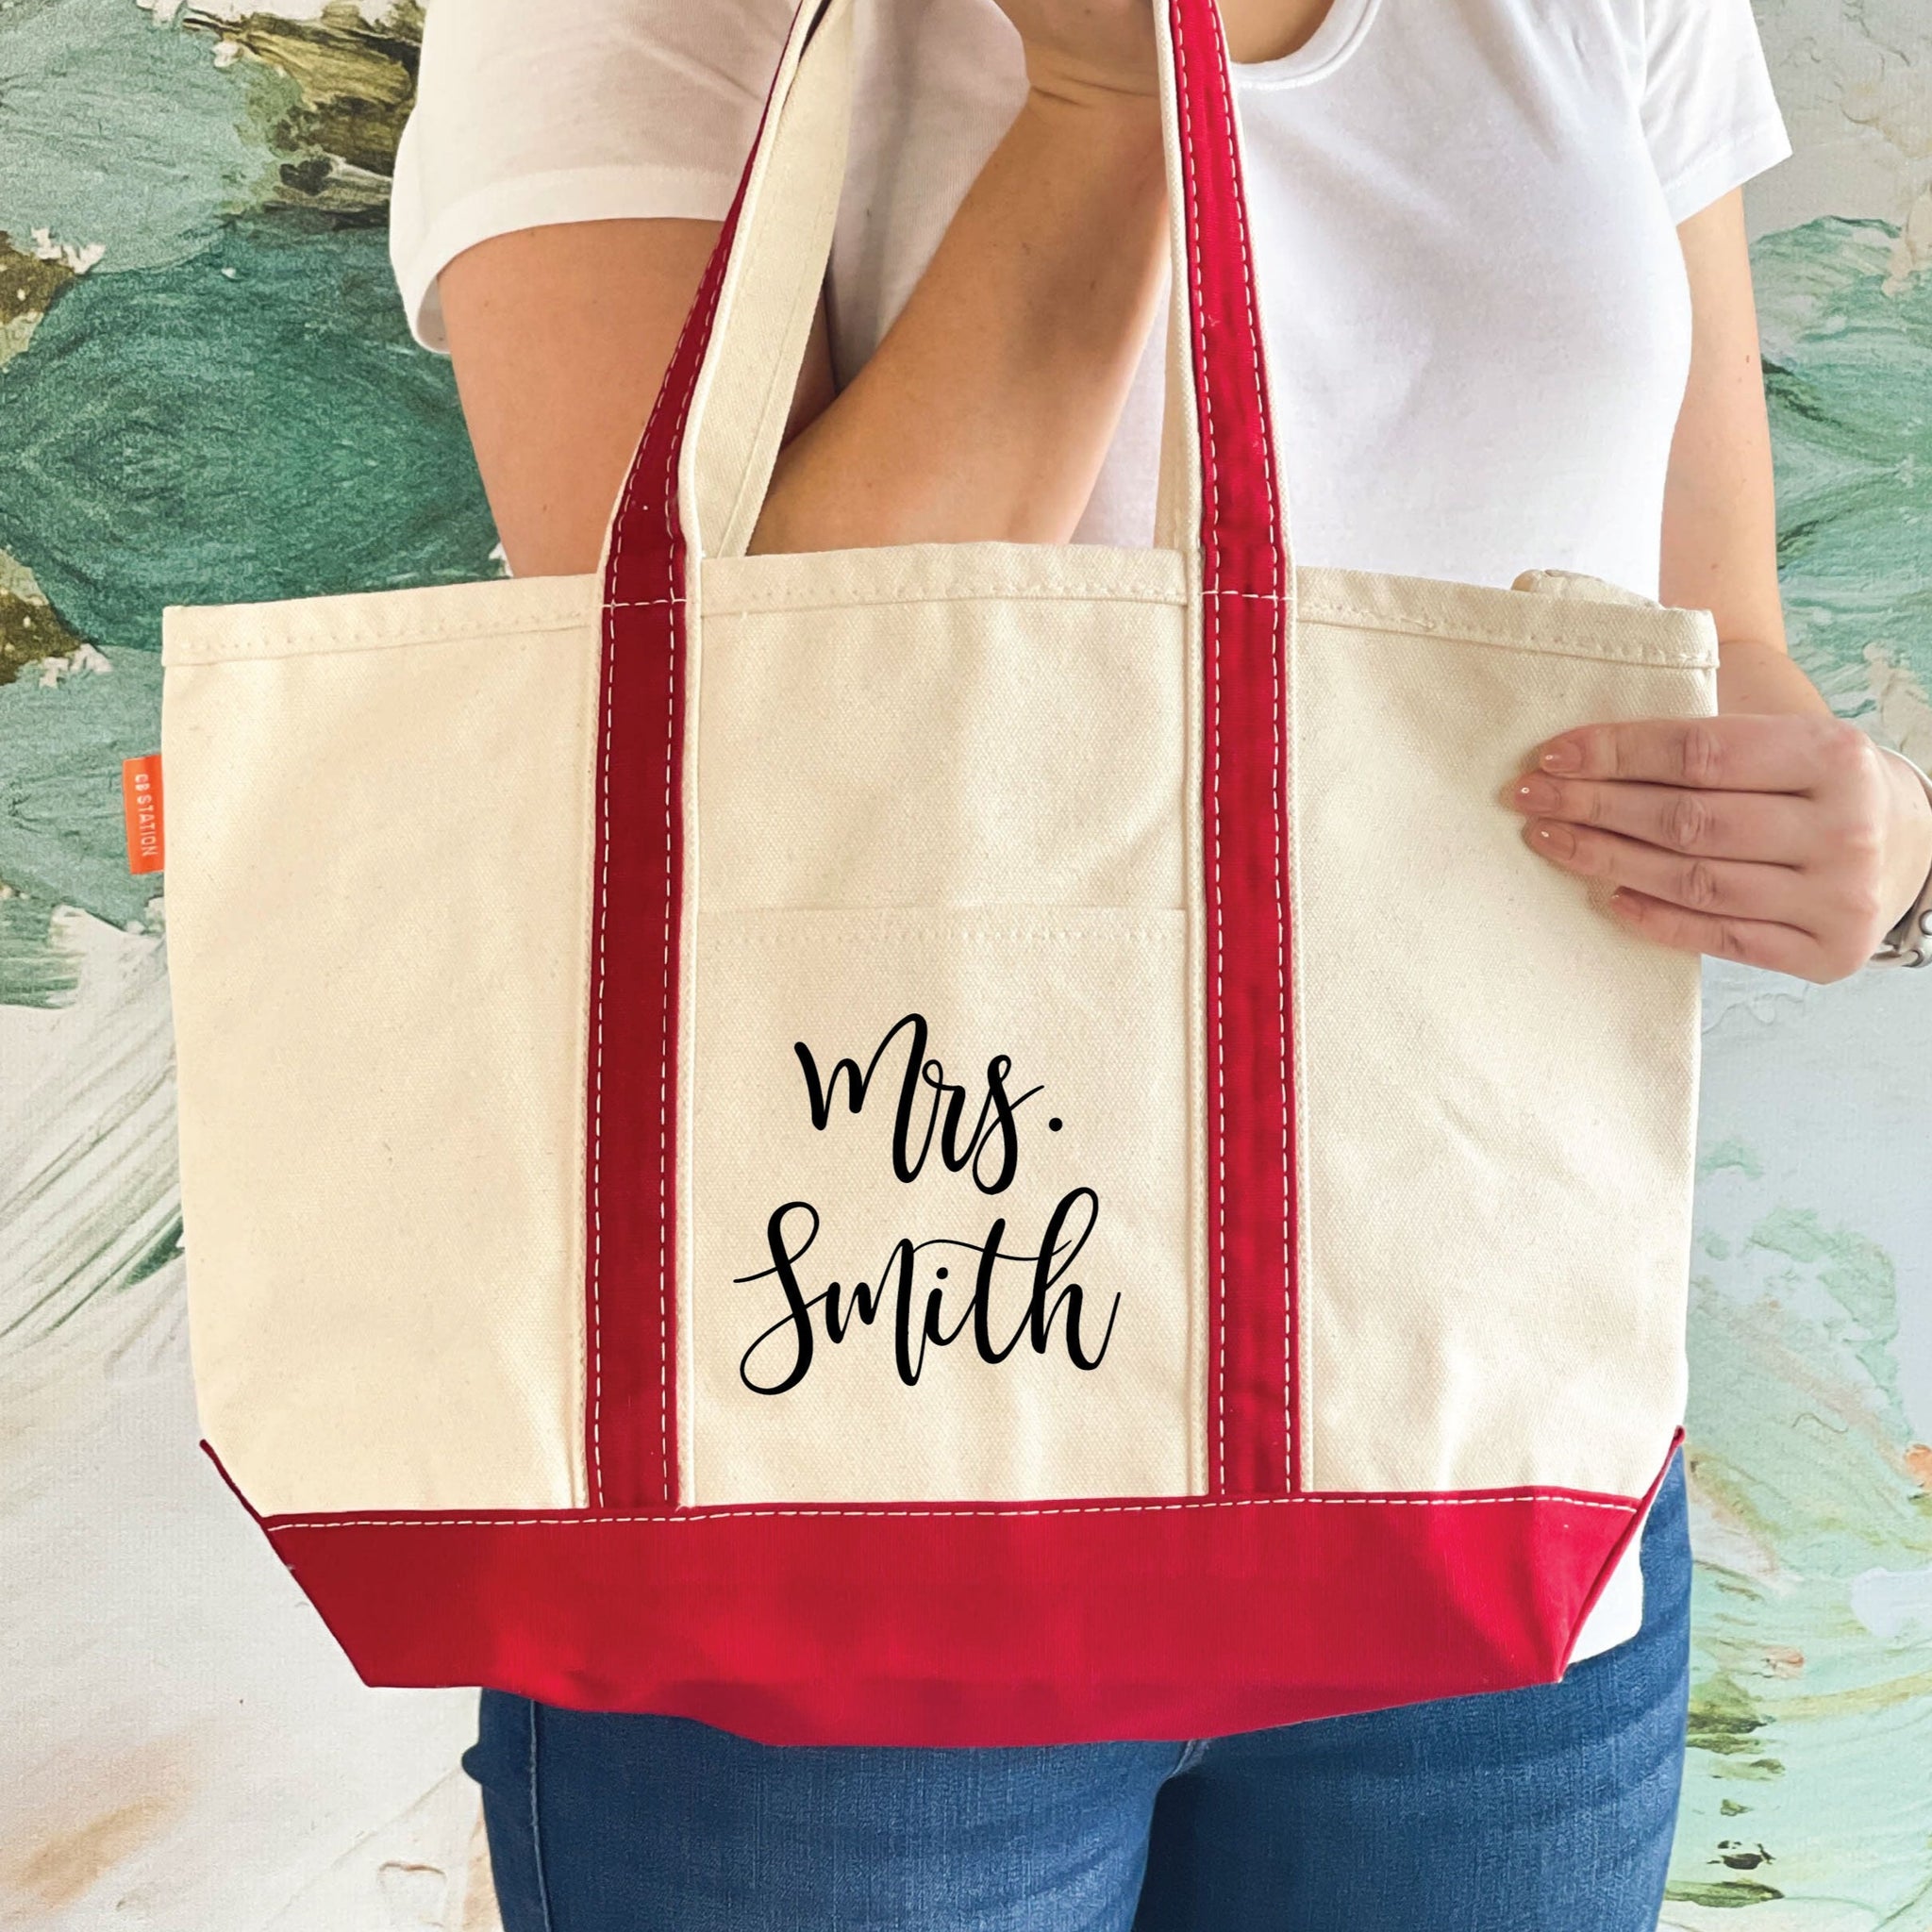 Monogrammed Classic Canvas Boat Tote - Large